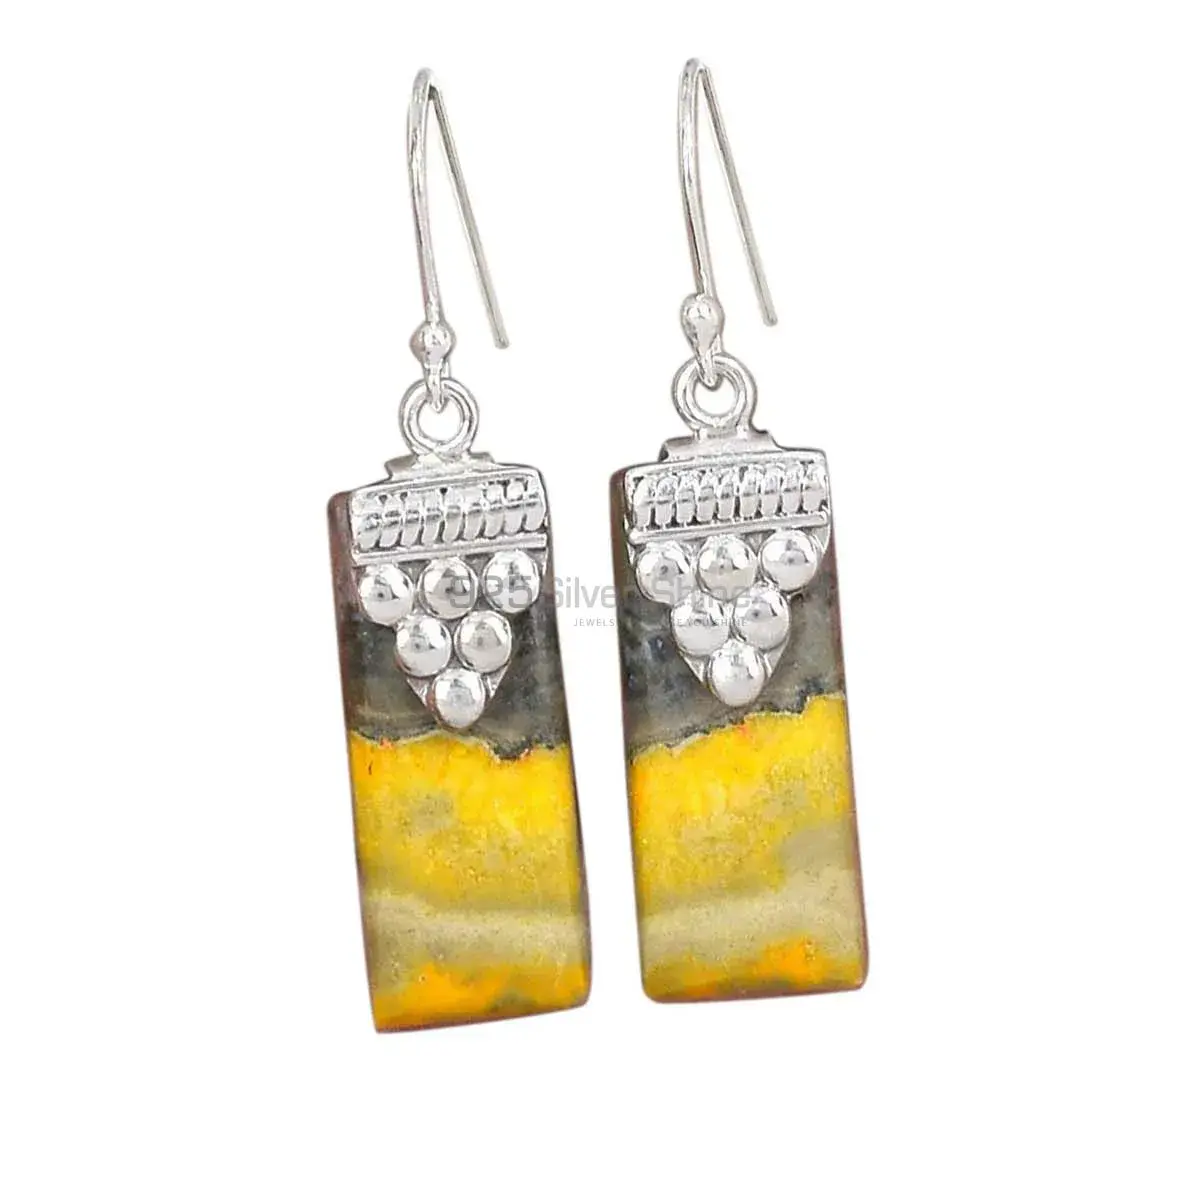 Inexpensive 925 Sterling Silver Earrings In Eclipse Gemstone Jewelry 925SE2465